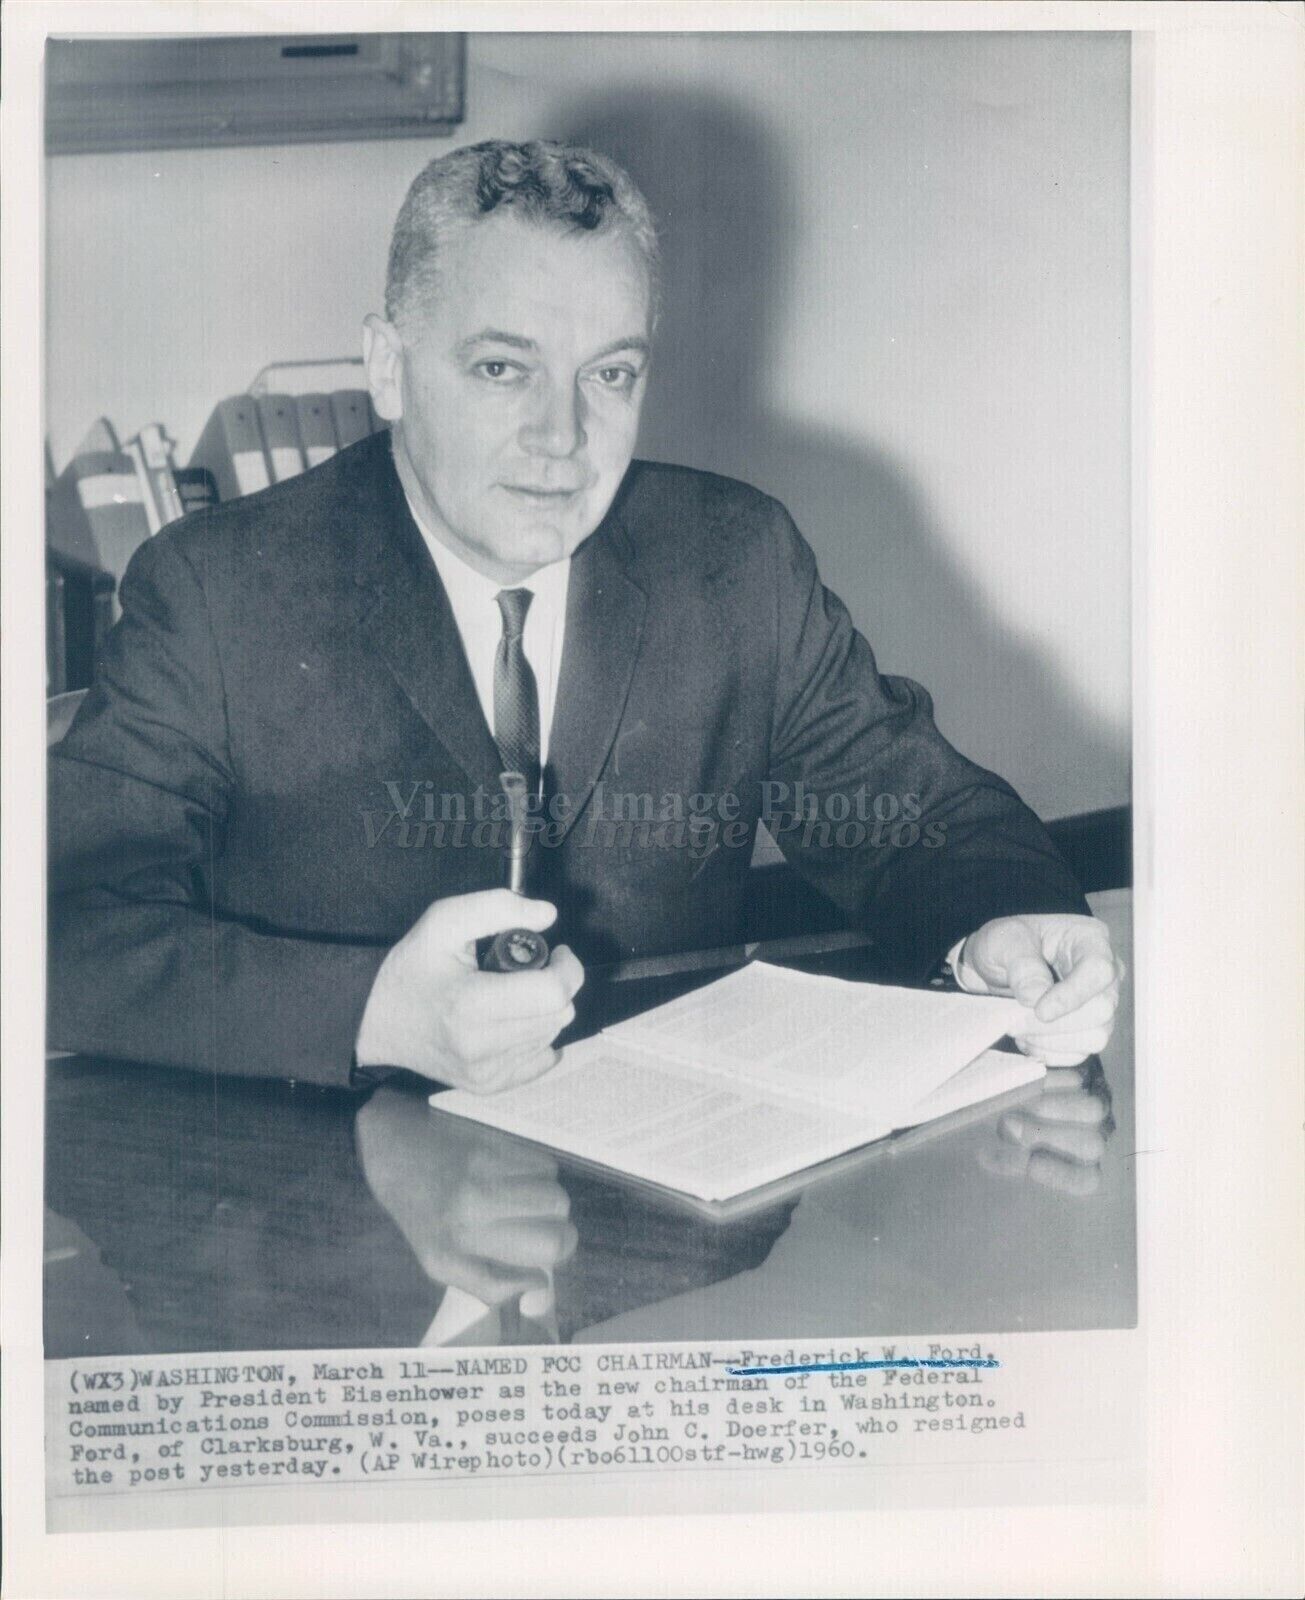 1960 Frederick W Ford Chairman Federal Communications Commission Business Photo